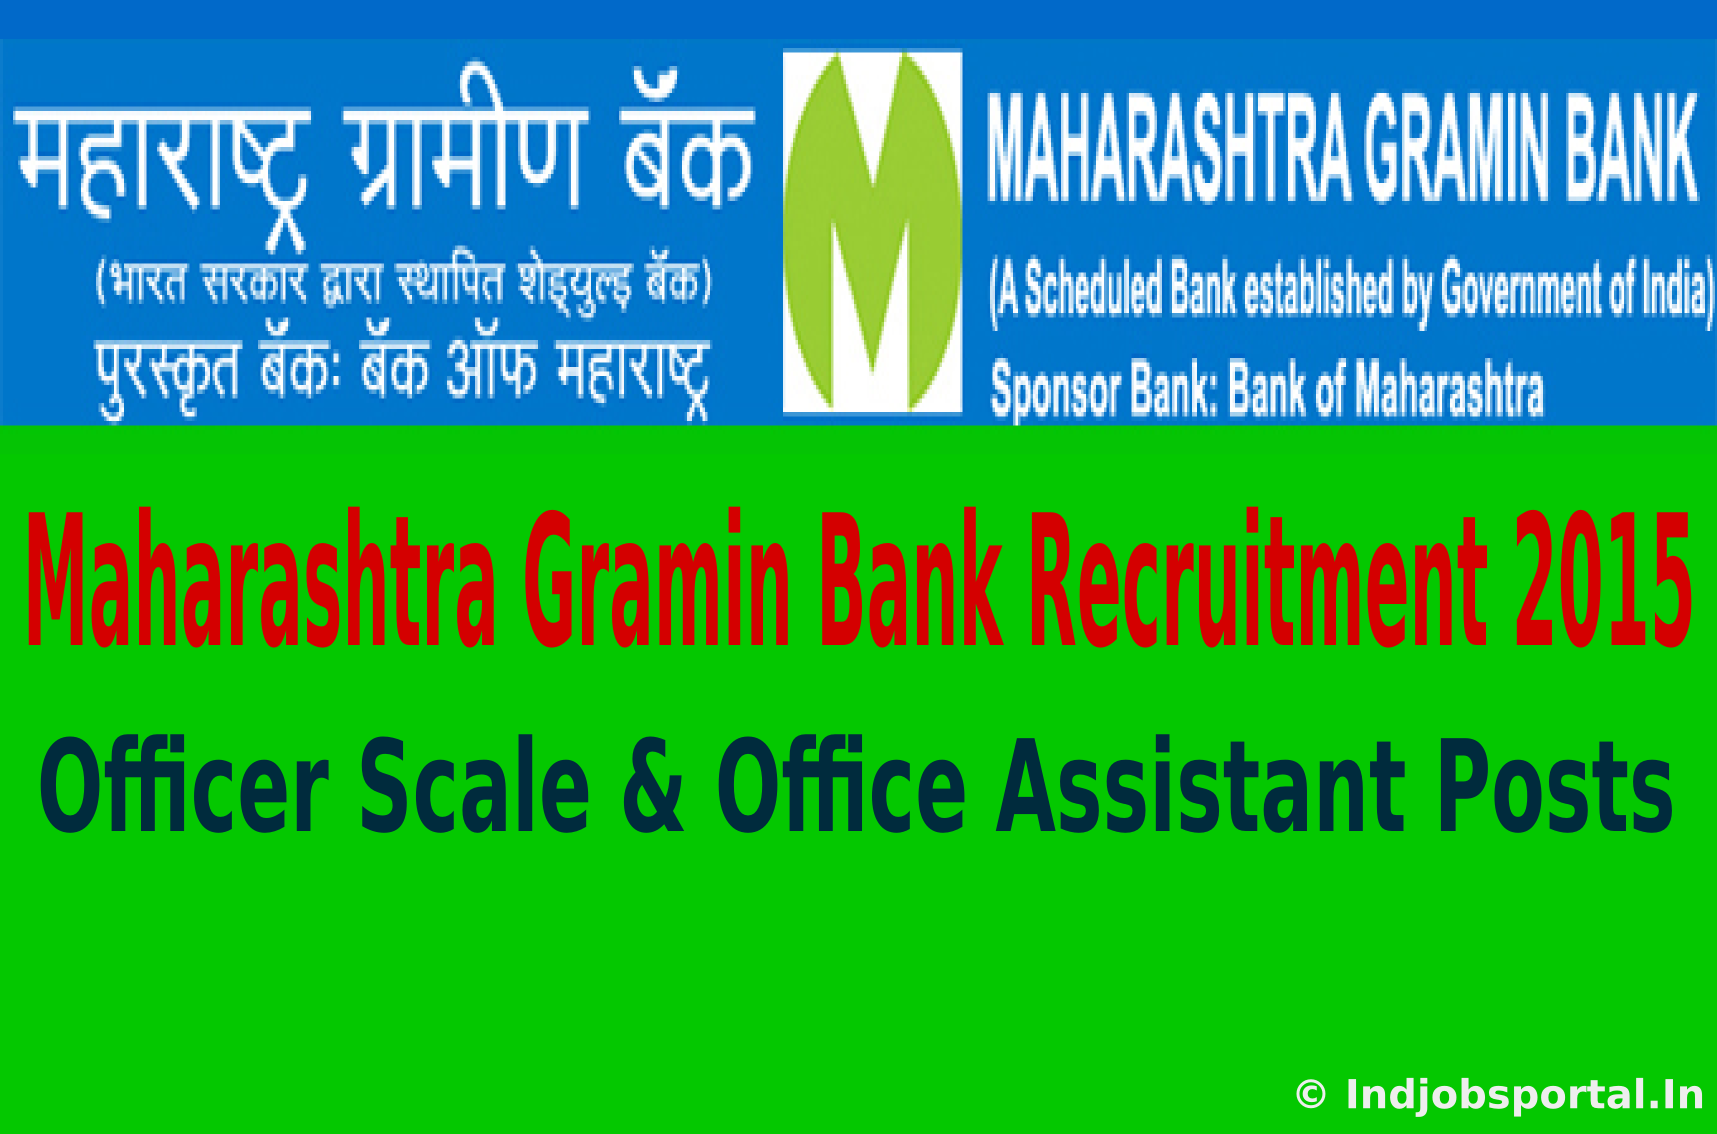 Maharashtra Gramin Bank Recruitment 2015 For 242 Officer Scale & Office Assistant Posts